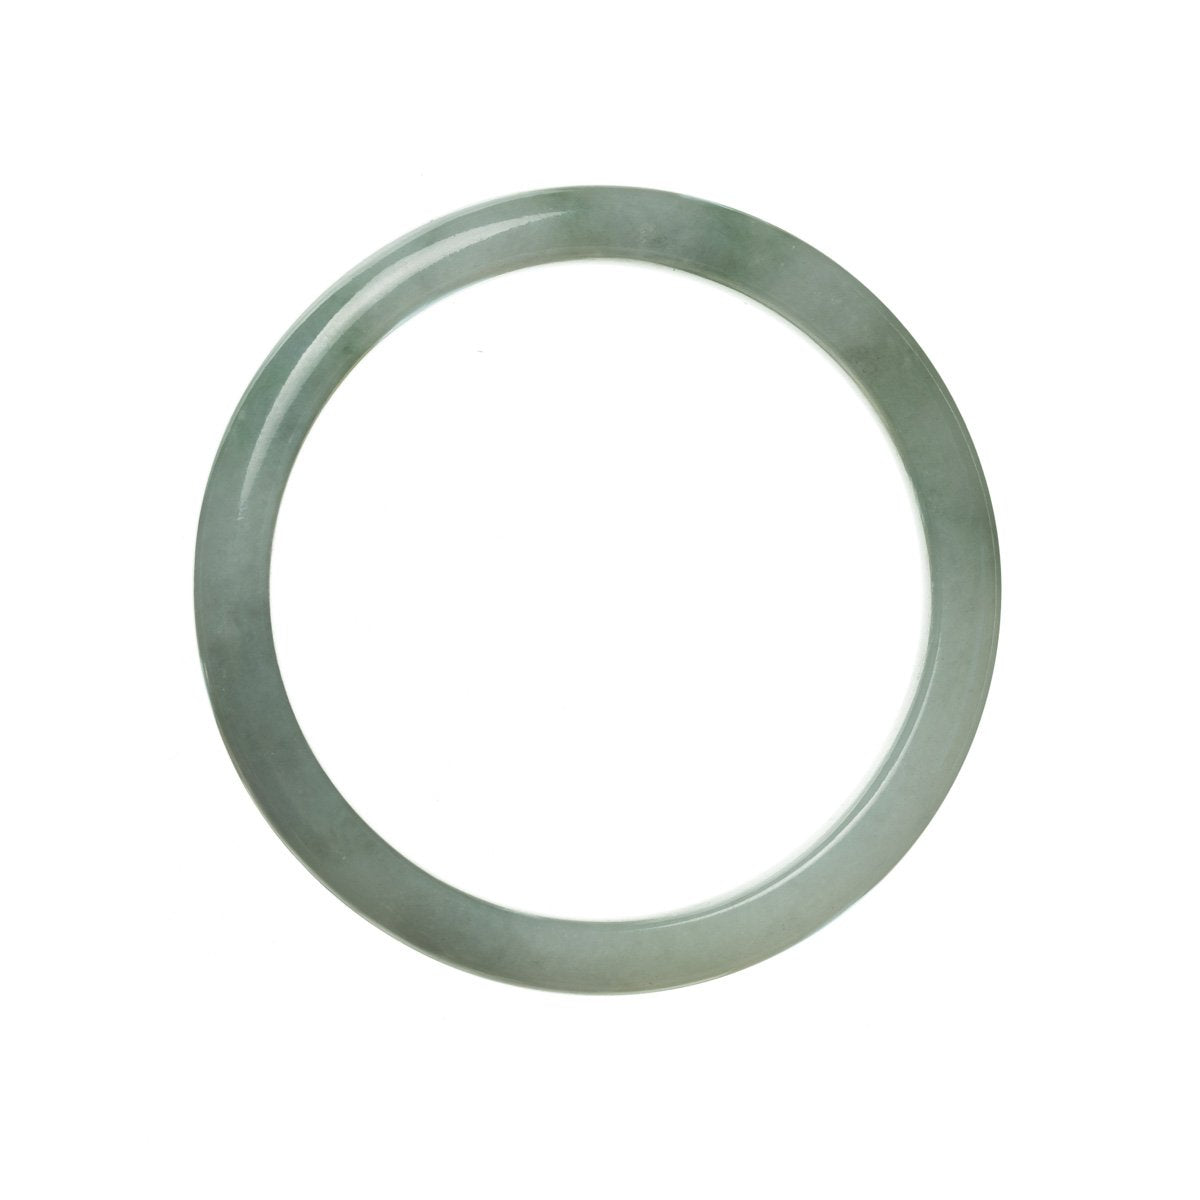 A close-up image of a real untreated green grey traditional jade bracelet. The bracelet is semi-round in shape and measures 55mm in diameter. It is a product of MAYS™.